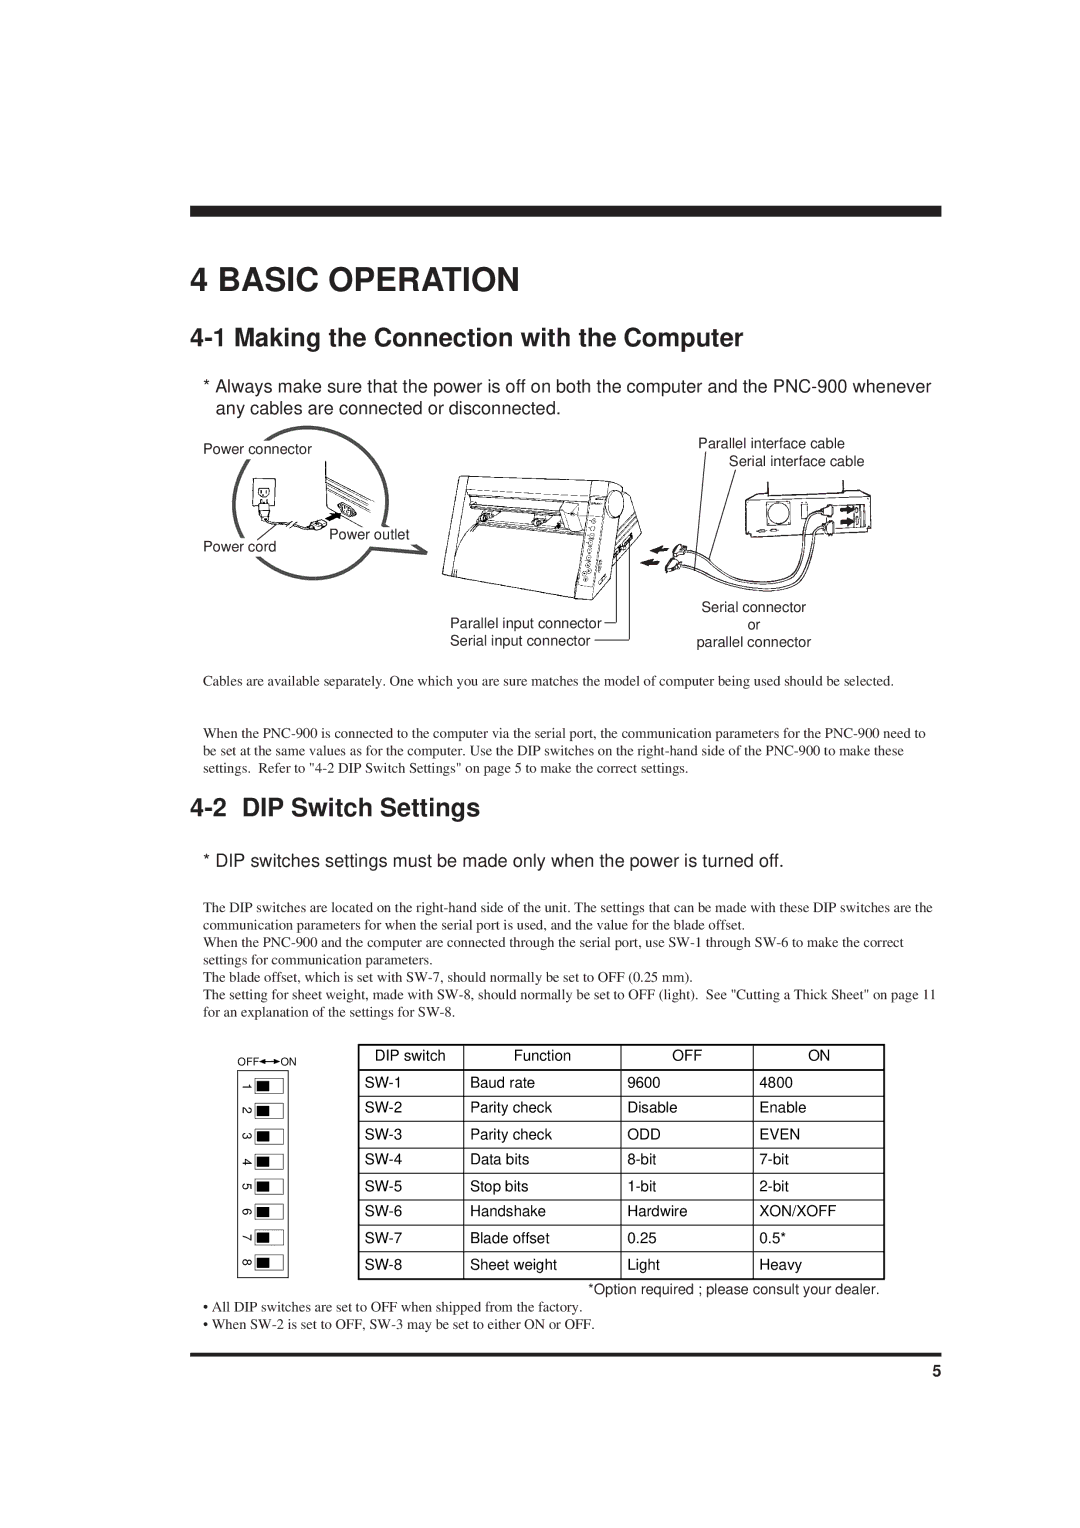 Roland PNC-900 user manual Basic Operation, Making the Connection with the Computer, DIP Switch Settings 